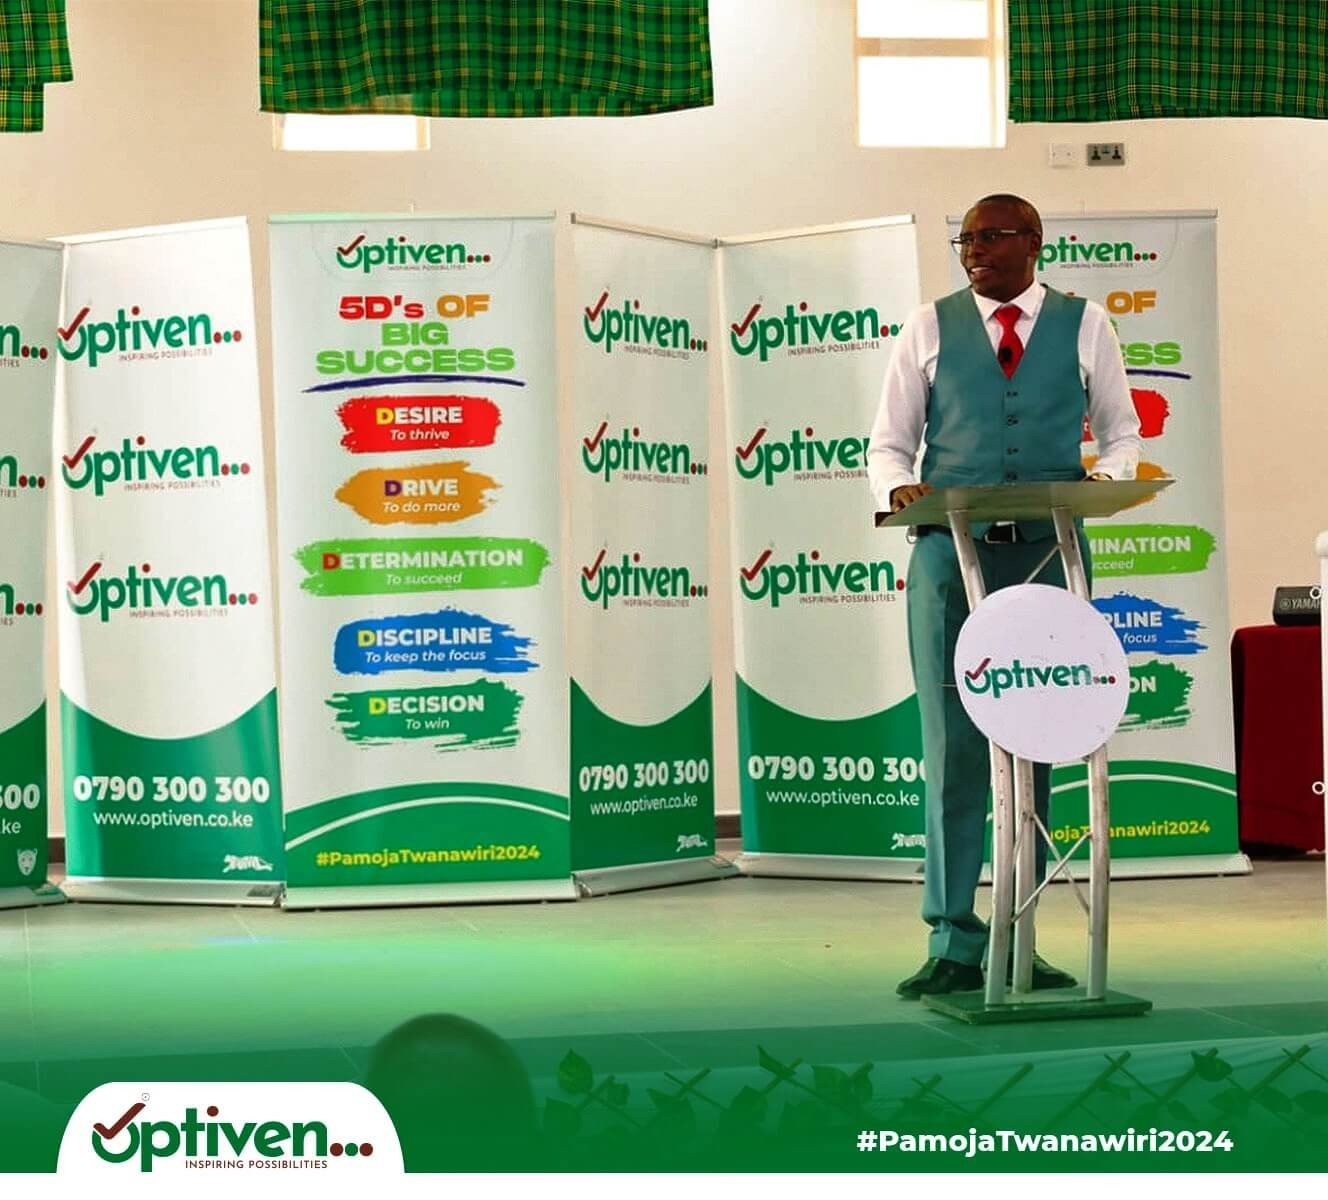 Optiven's Green Army Initiates 2024 with Thanksgiving